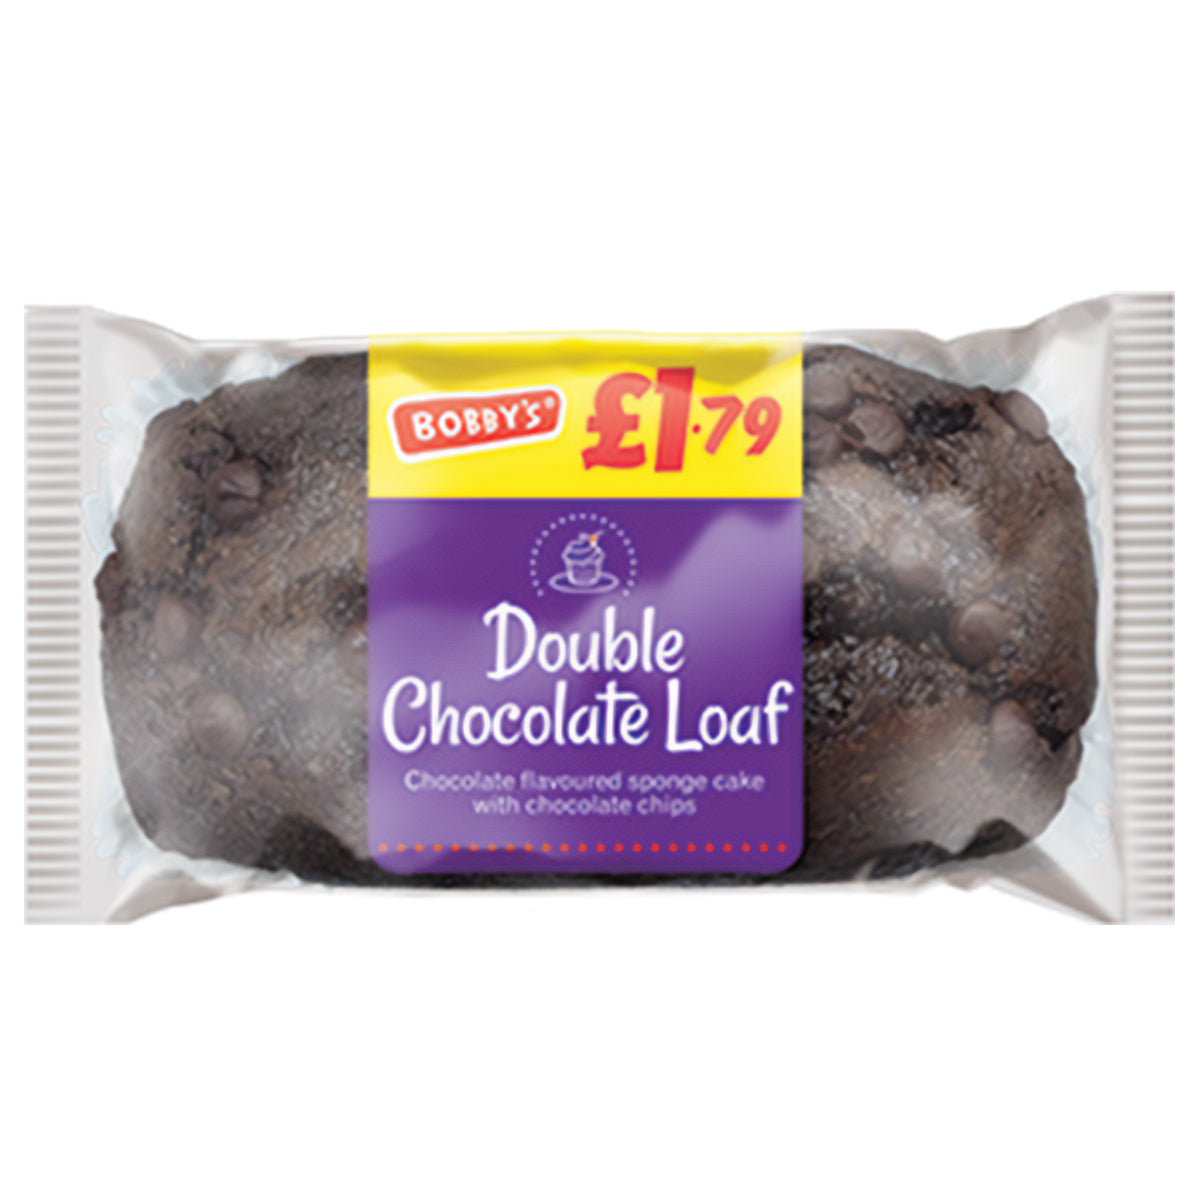 Bobbys - Double Chocolate Loaf - 295g on a white background.